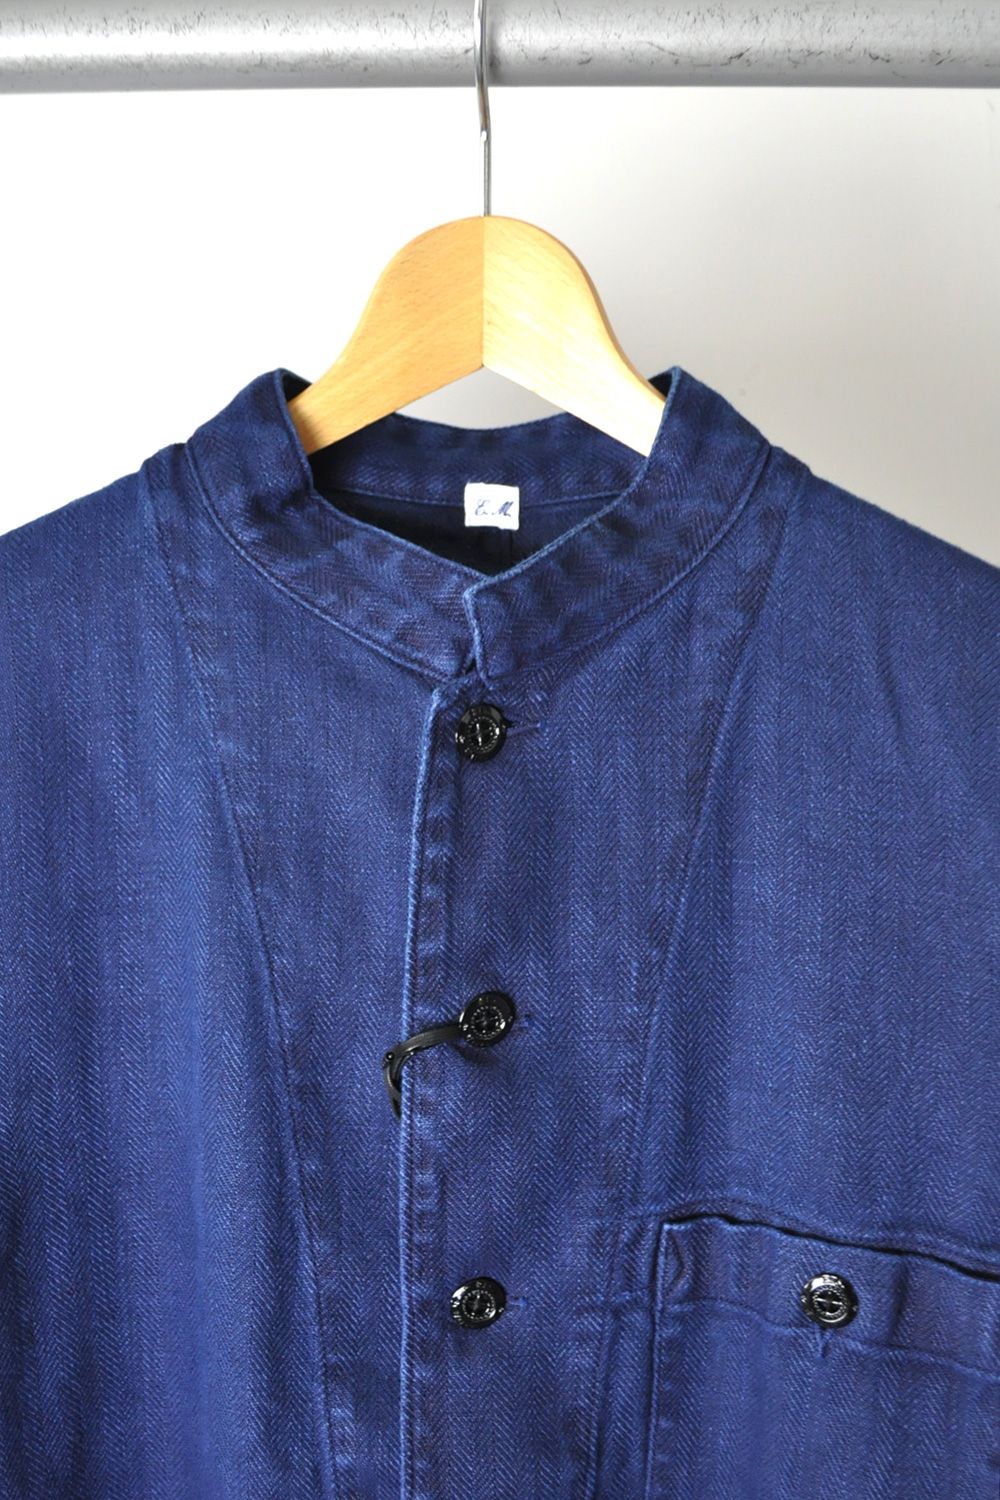 Ets.MATERIAUX - French Work Jacket / BLUE | Stripe Online Store